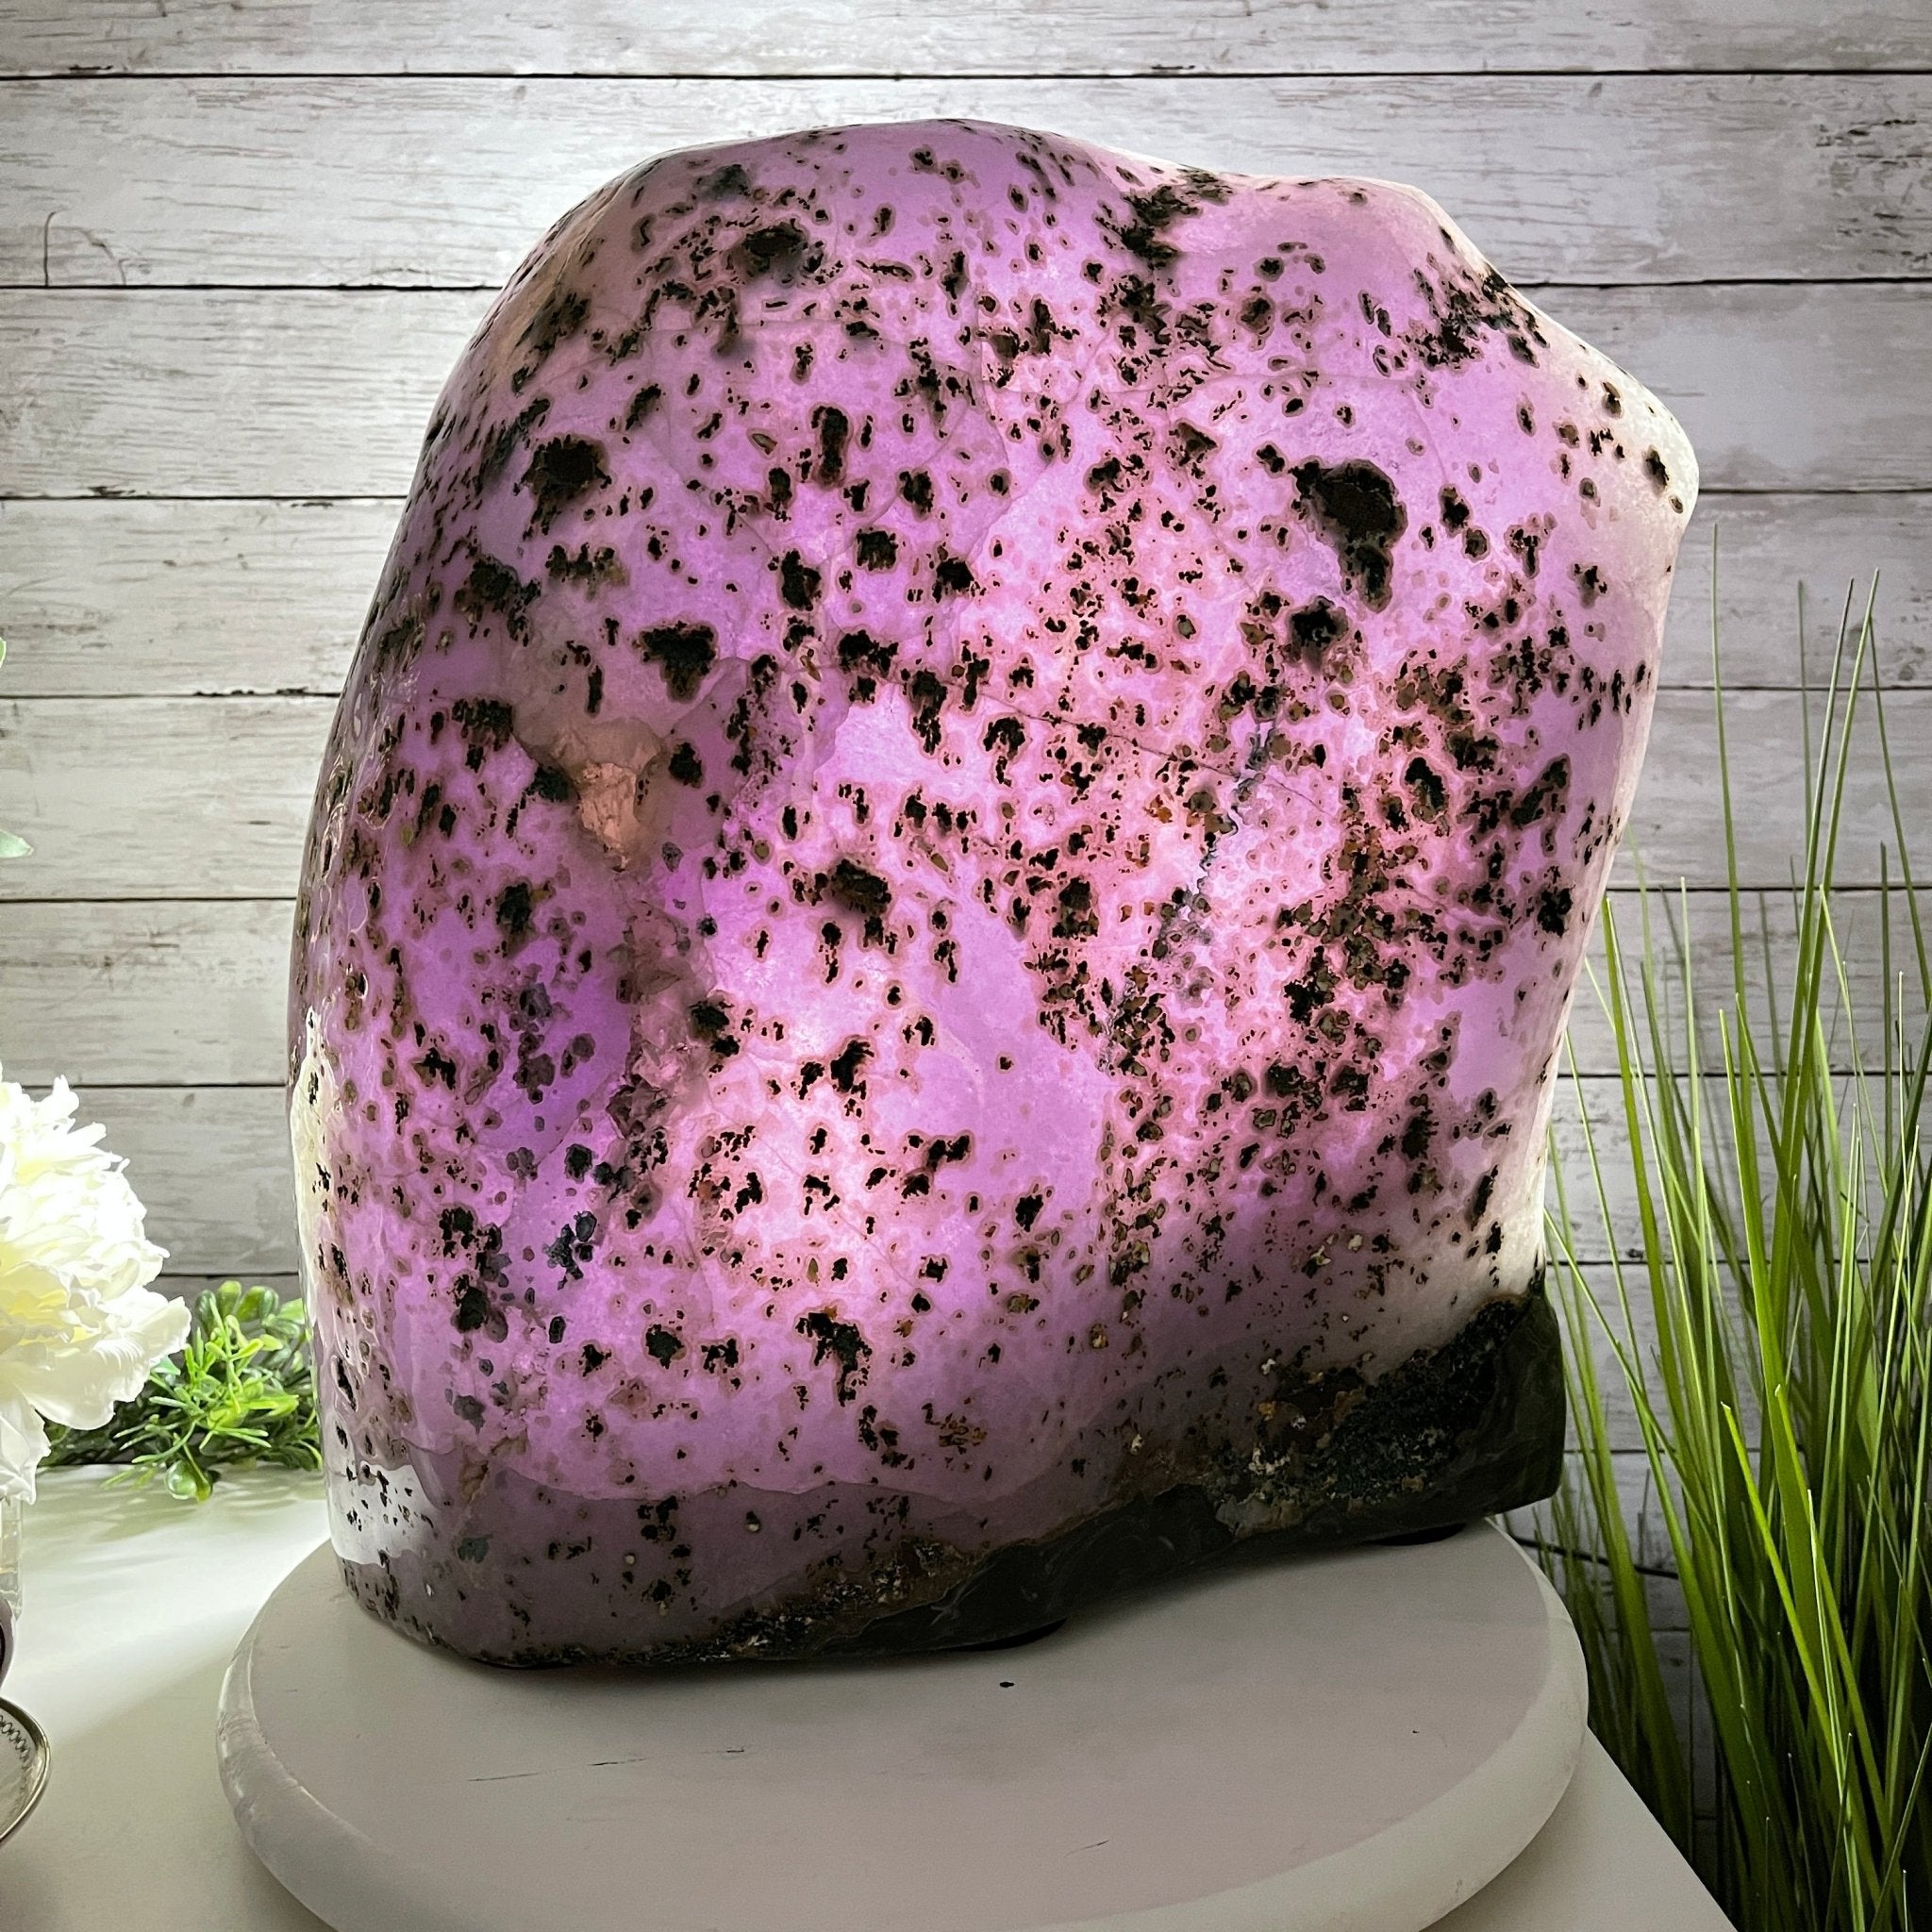 Extra Quality Polished Brazilian Amethyst Cathedral, 76.7 lbs & 16.75" tall Model #5602-0103 by Brazil Gems - Brazil GemsBrazil GemsExtra Quality Polished Brazilian Amethyst Cathedral, 76.7 lbs & 16.75" tall Model #5602-0103 by Brazil GemsPolished Cathedrals5602-0103